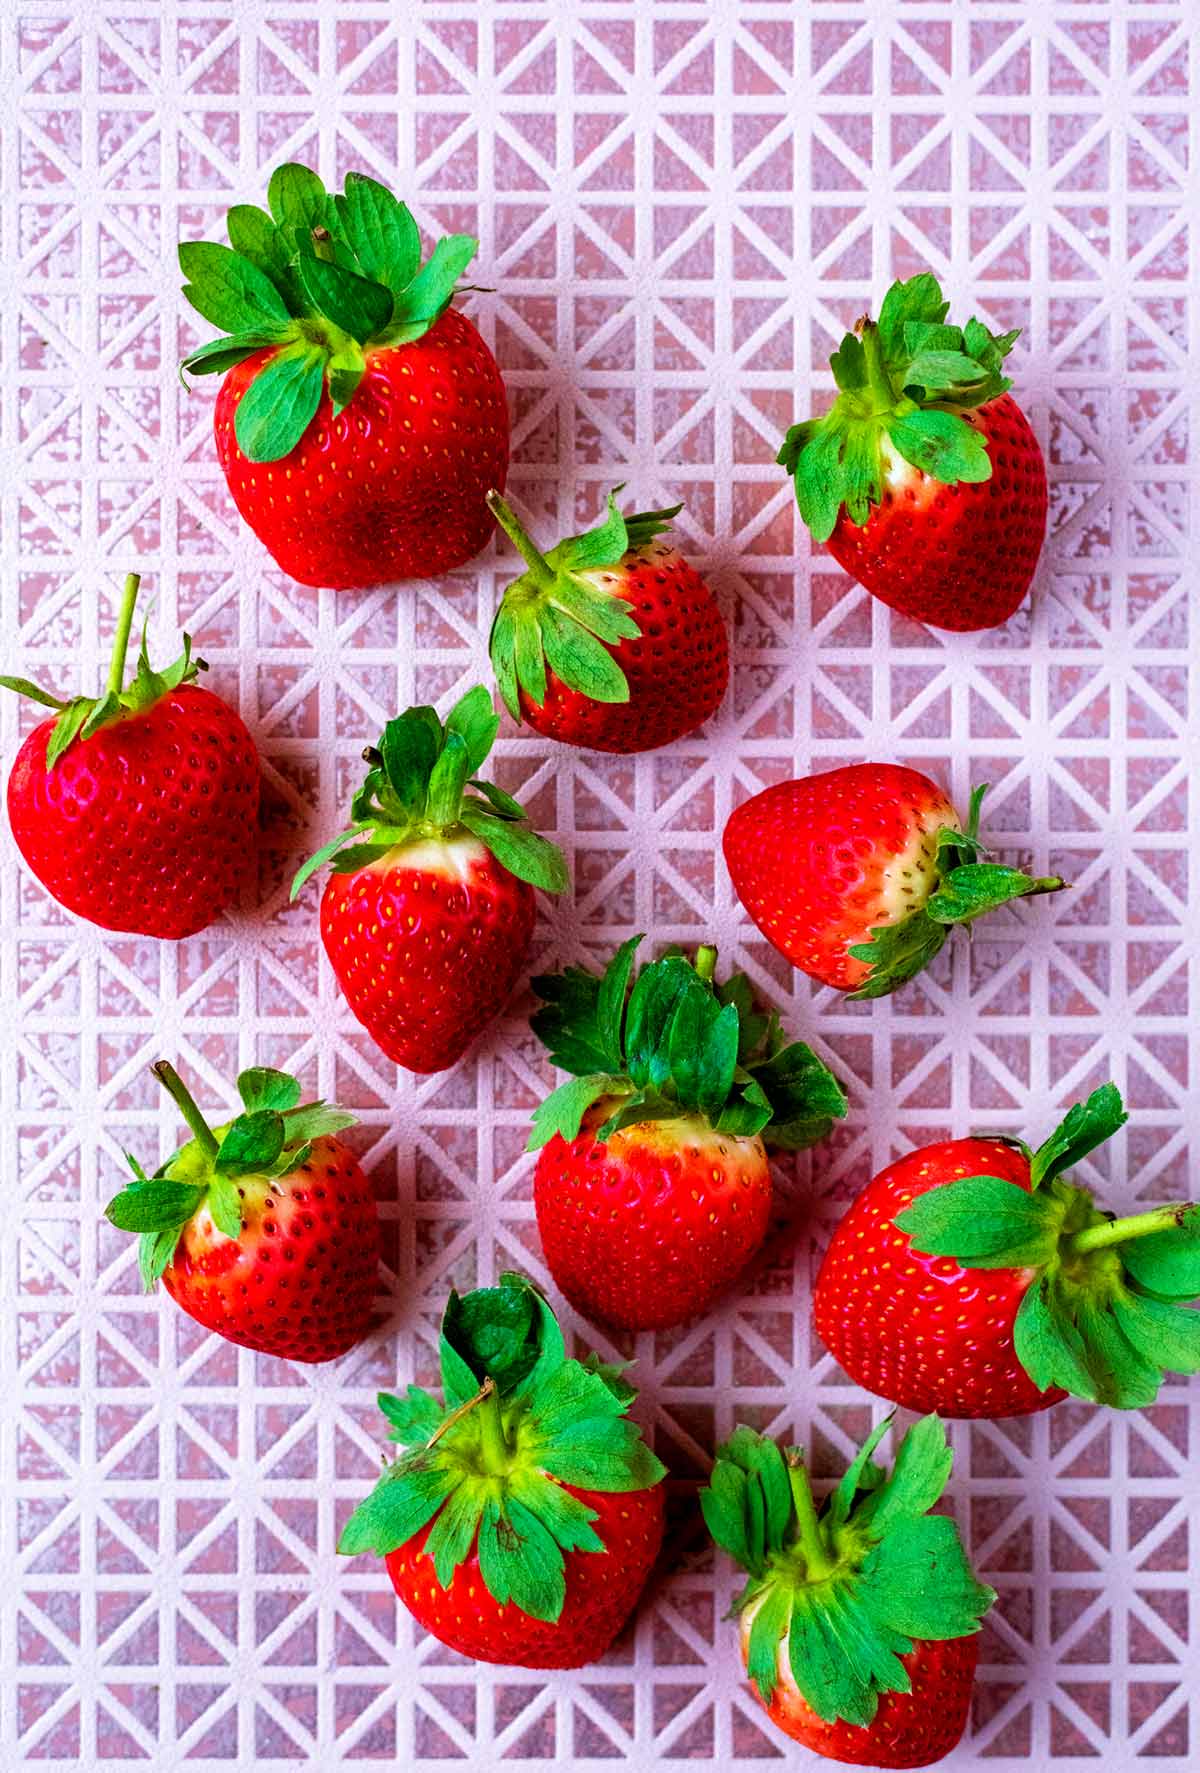 Eleven fresh strawberries on a tiled surface.